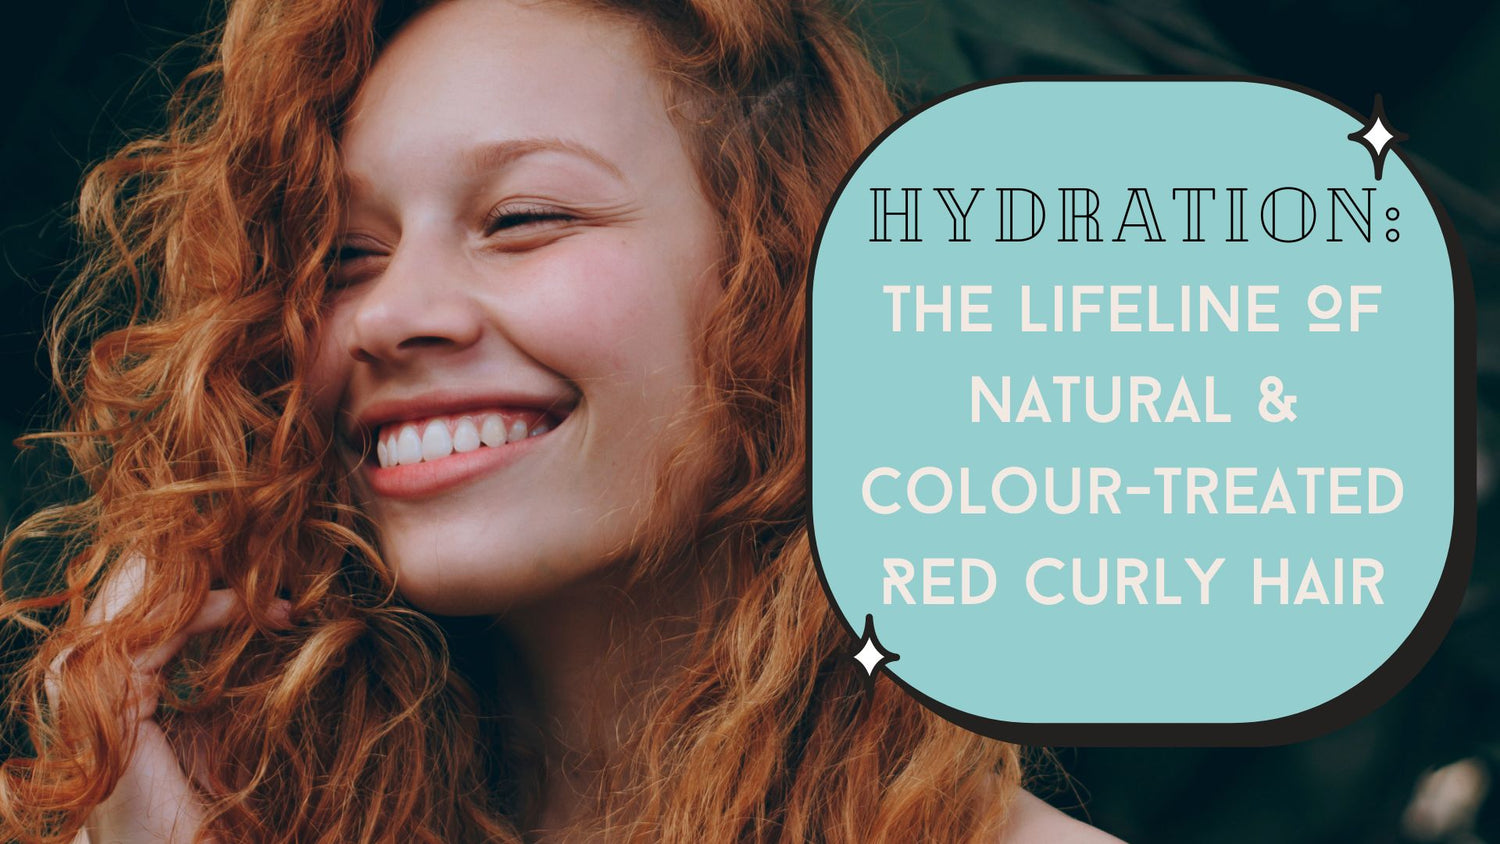 Hydration, the lifeline of natural and colour treated red curly hair 